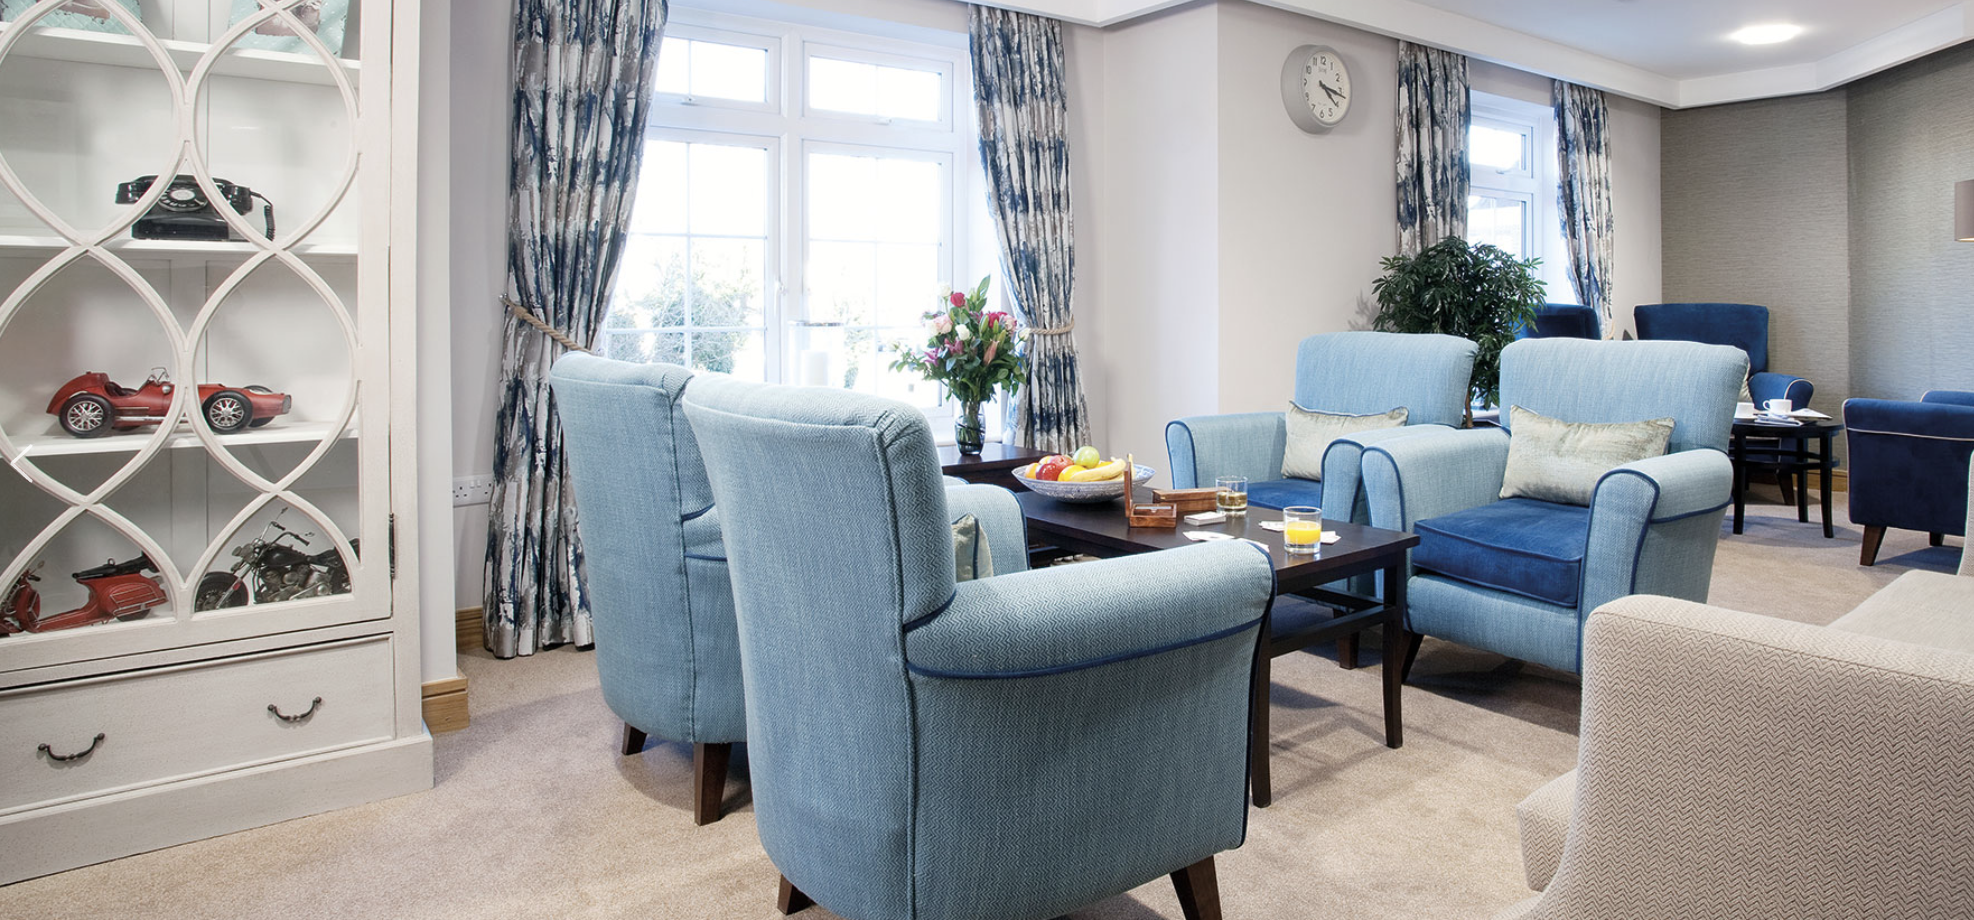 Communal Lounge of Aarandale Manor Care Home in London, England